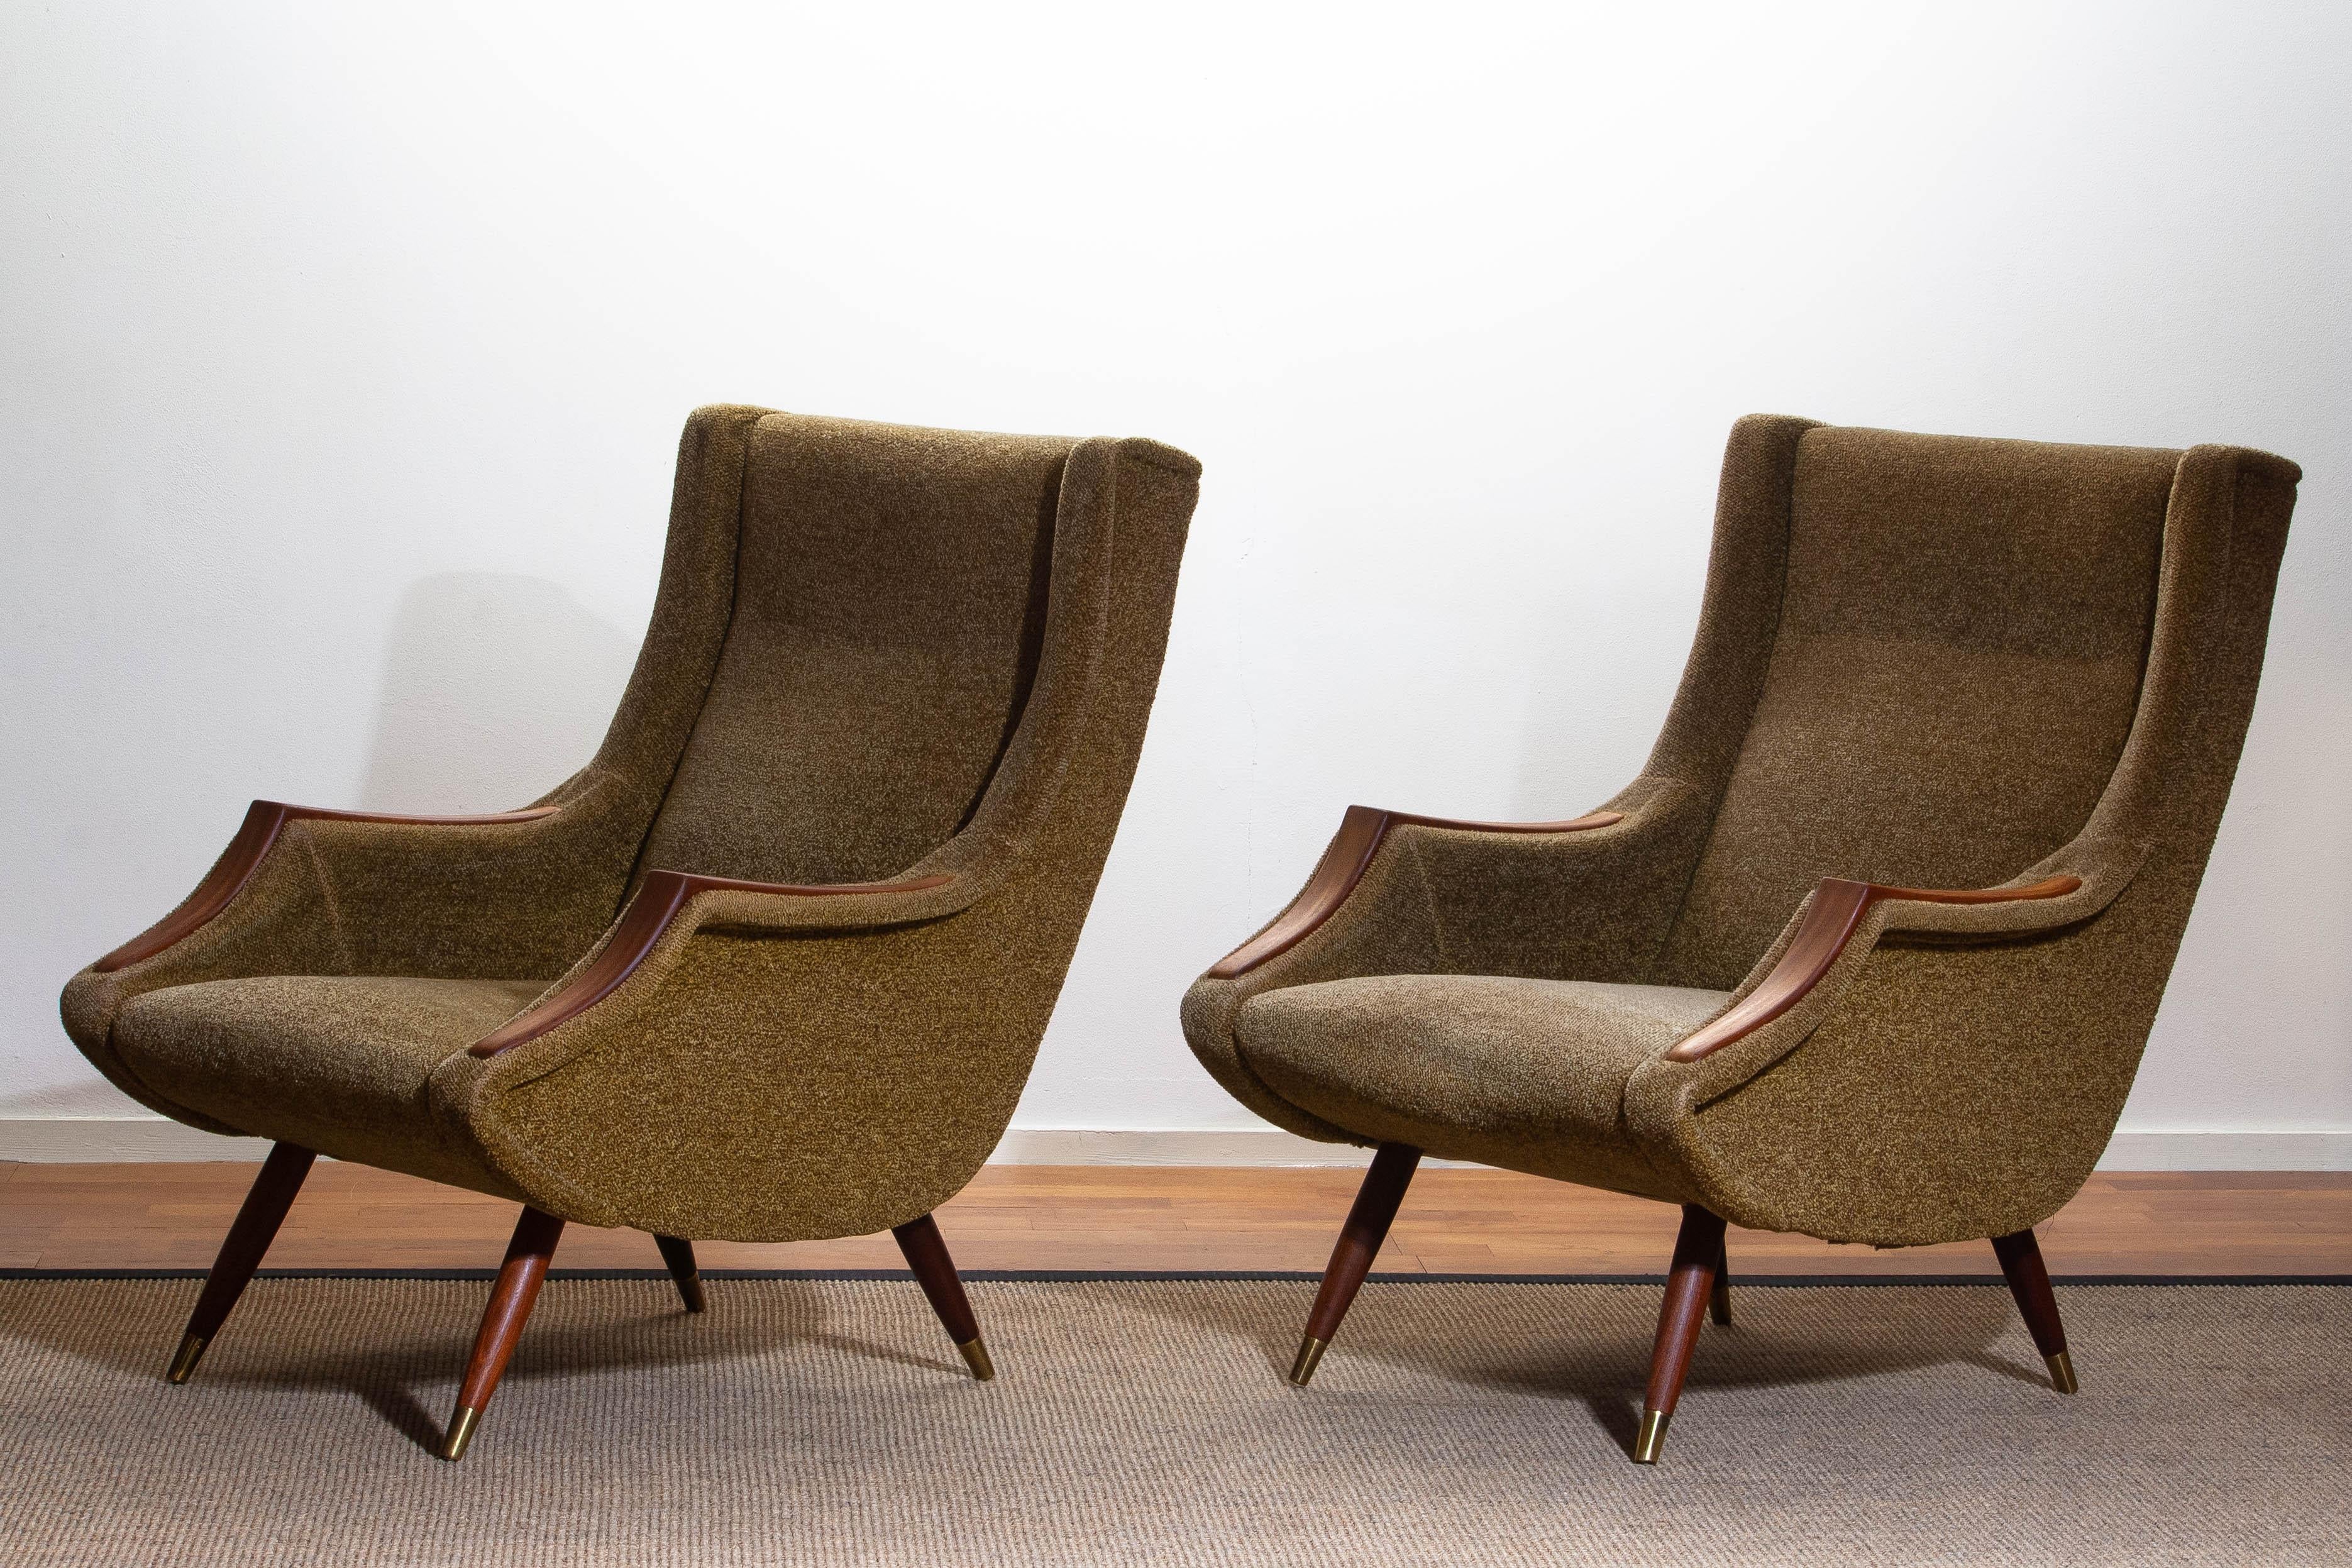 Mid-20th Century Set Italian Lounge / Easy Chairs from the 1950s by Aldo Morbelli for Isa Bergamo